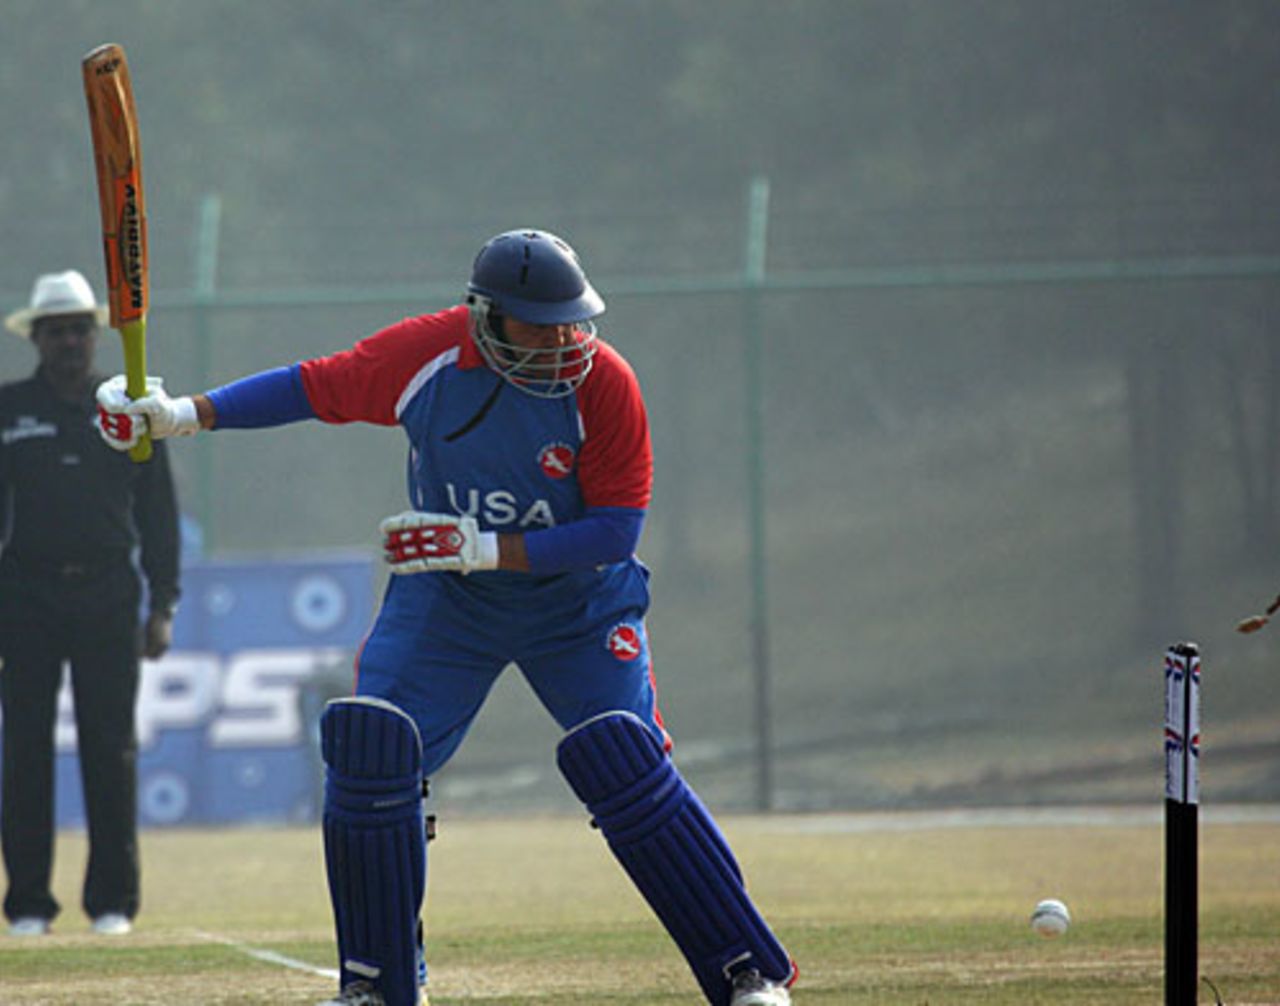 Sushil Nadkarni has his furniture rearranged, Jersey v USA, ICC World Cricket League Division Five, Kirtipur, February 23, 2010